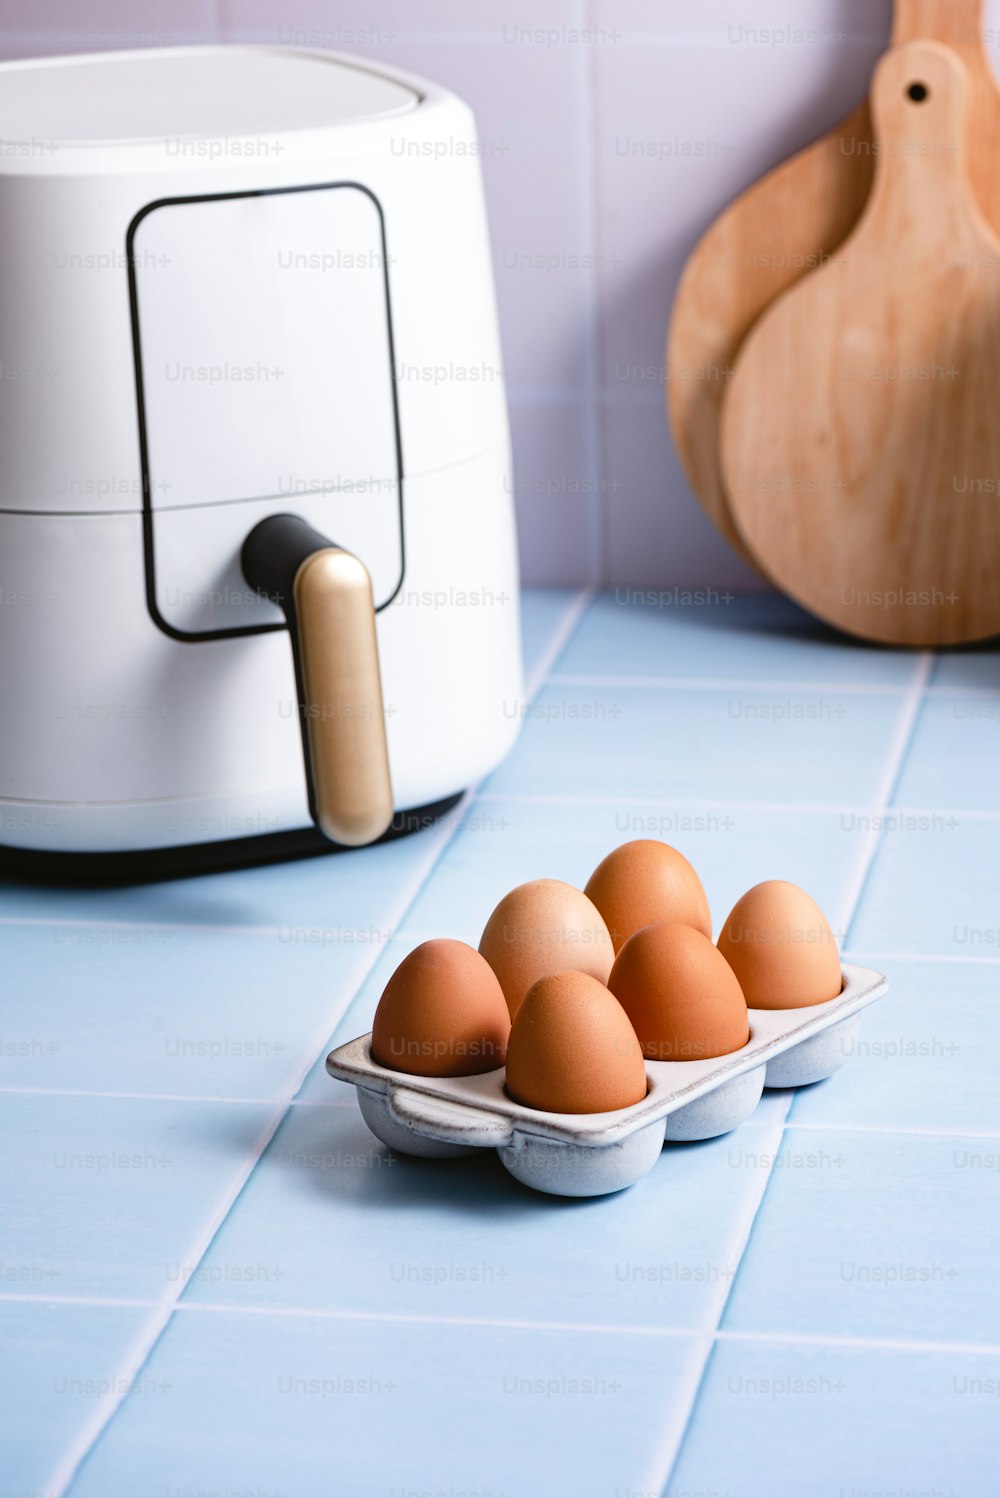 a plate of eggs sitting on a blue tiled counter